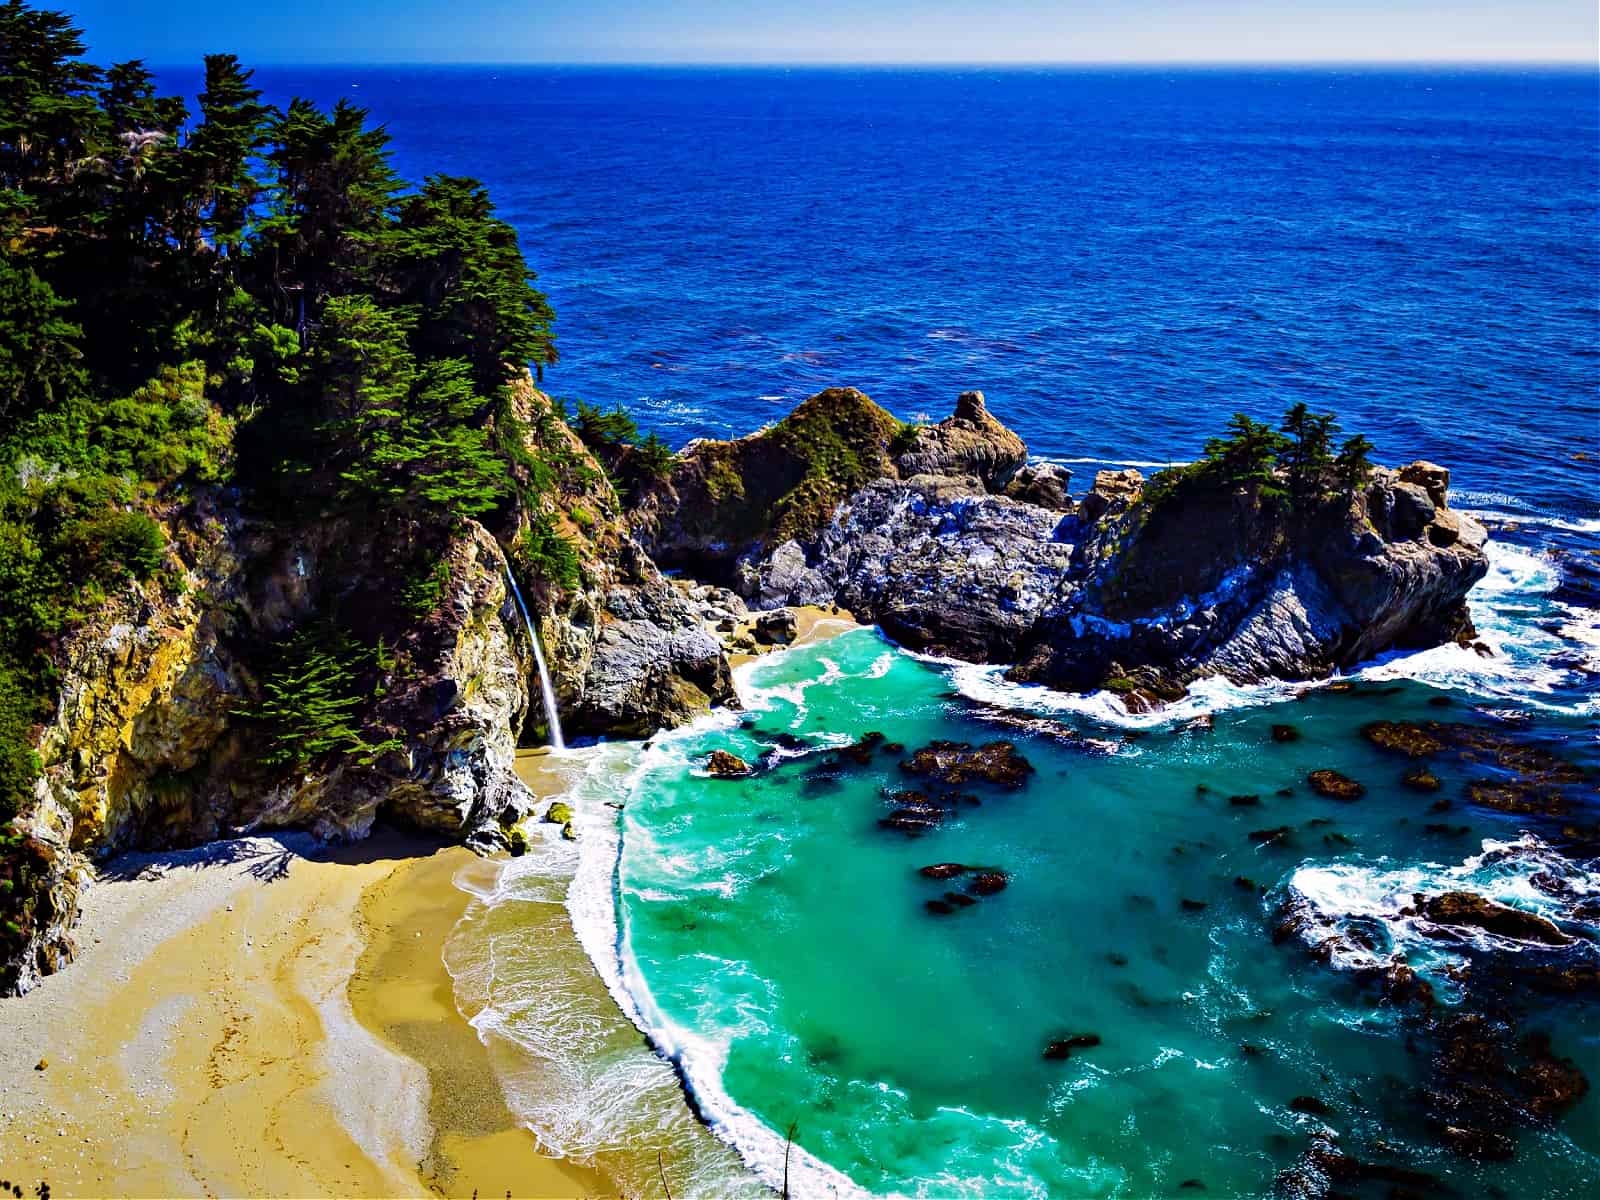 Aerial view of Water Fall McWay Falls Julia Pfeiffer Burns Park Big Sur California. McWay Falls a waterfall empties directly into the ocean.